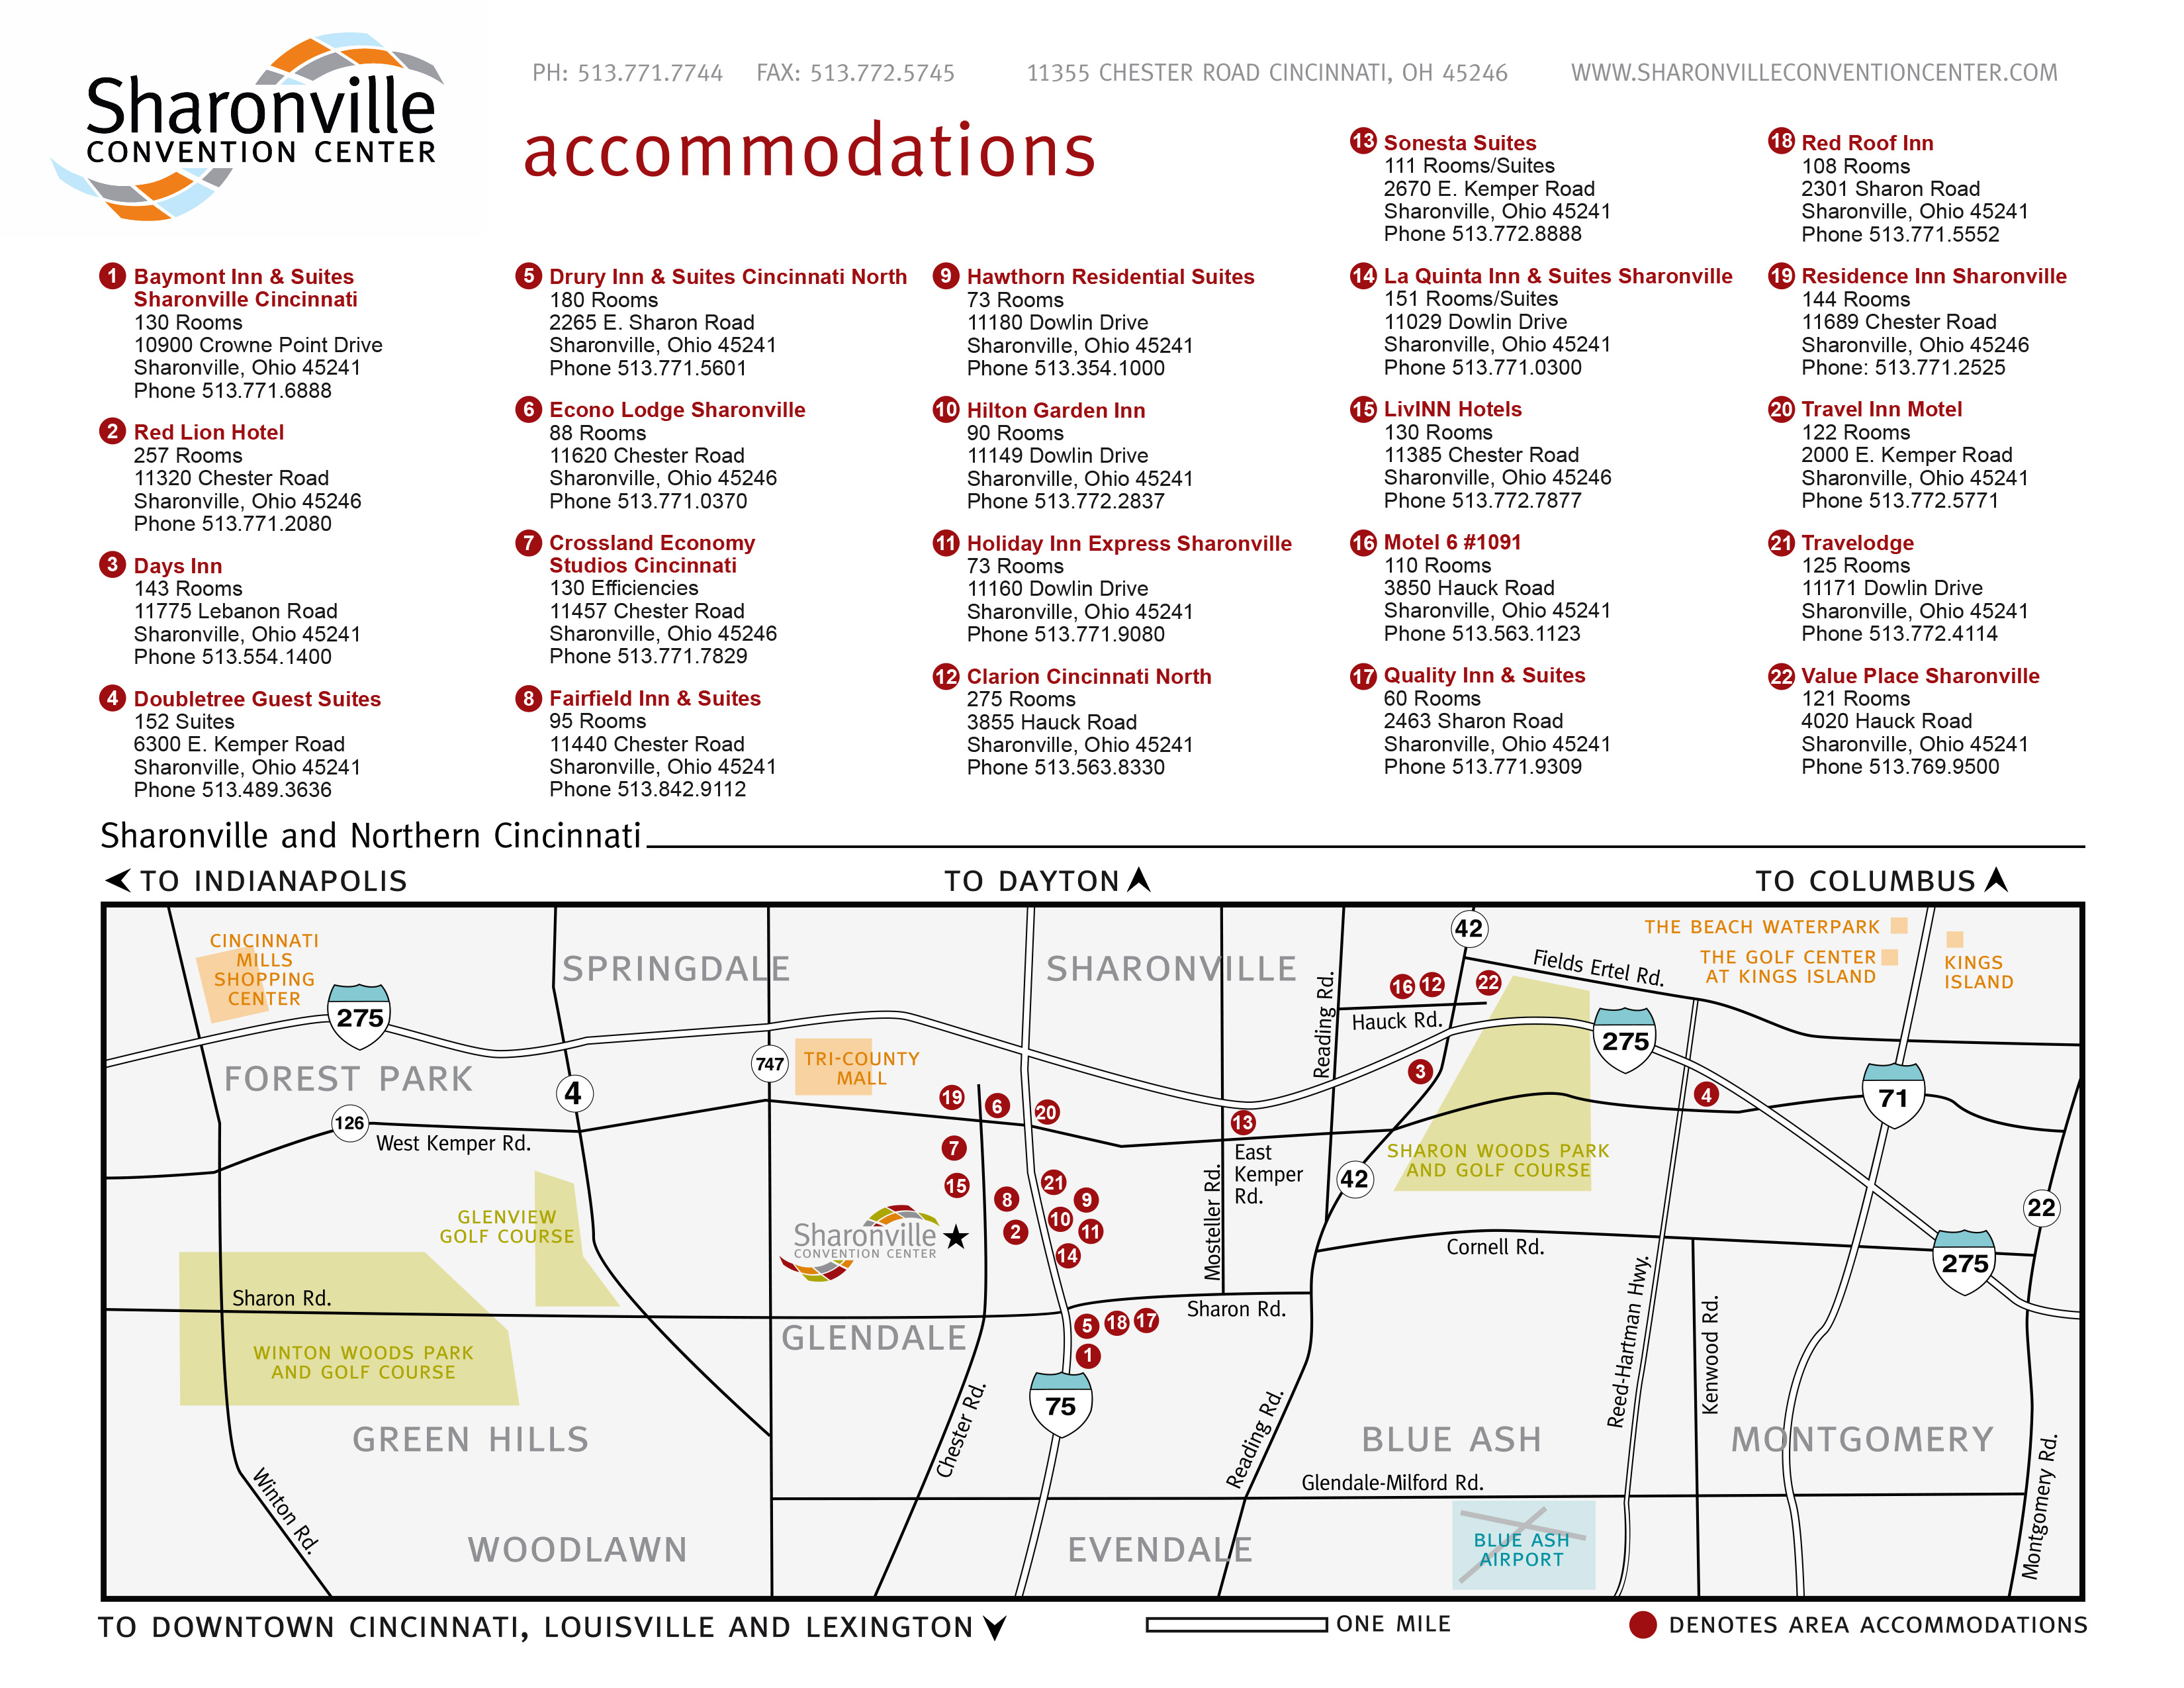 Sharonville Convention Center Accommodations Map (thumb)